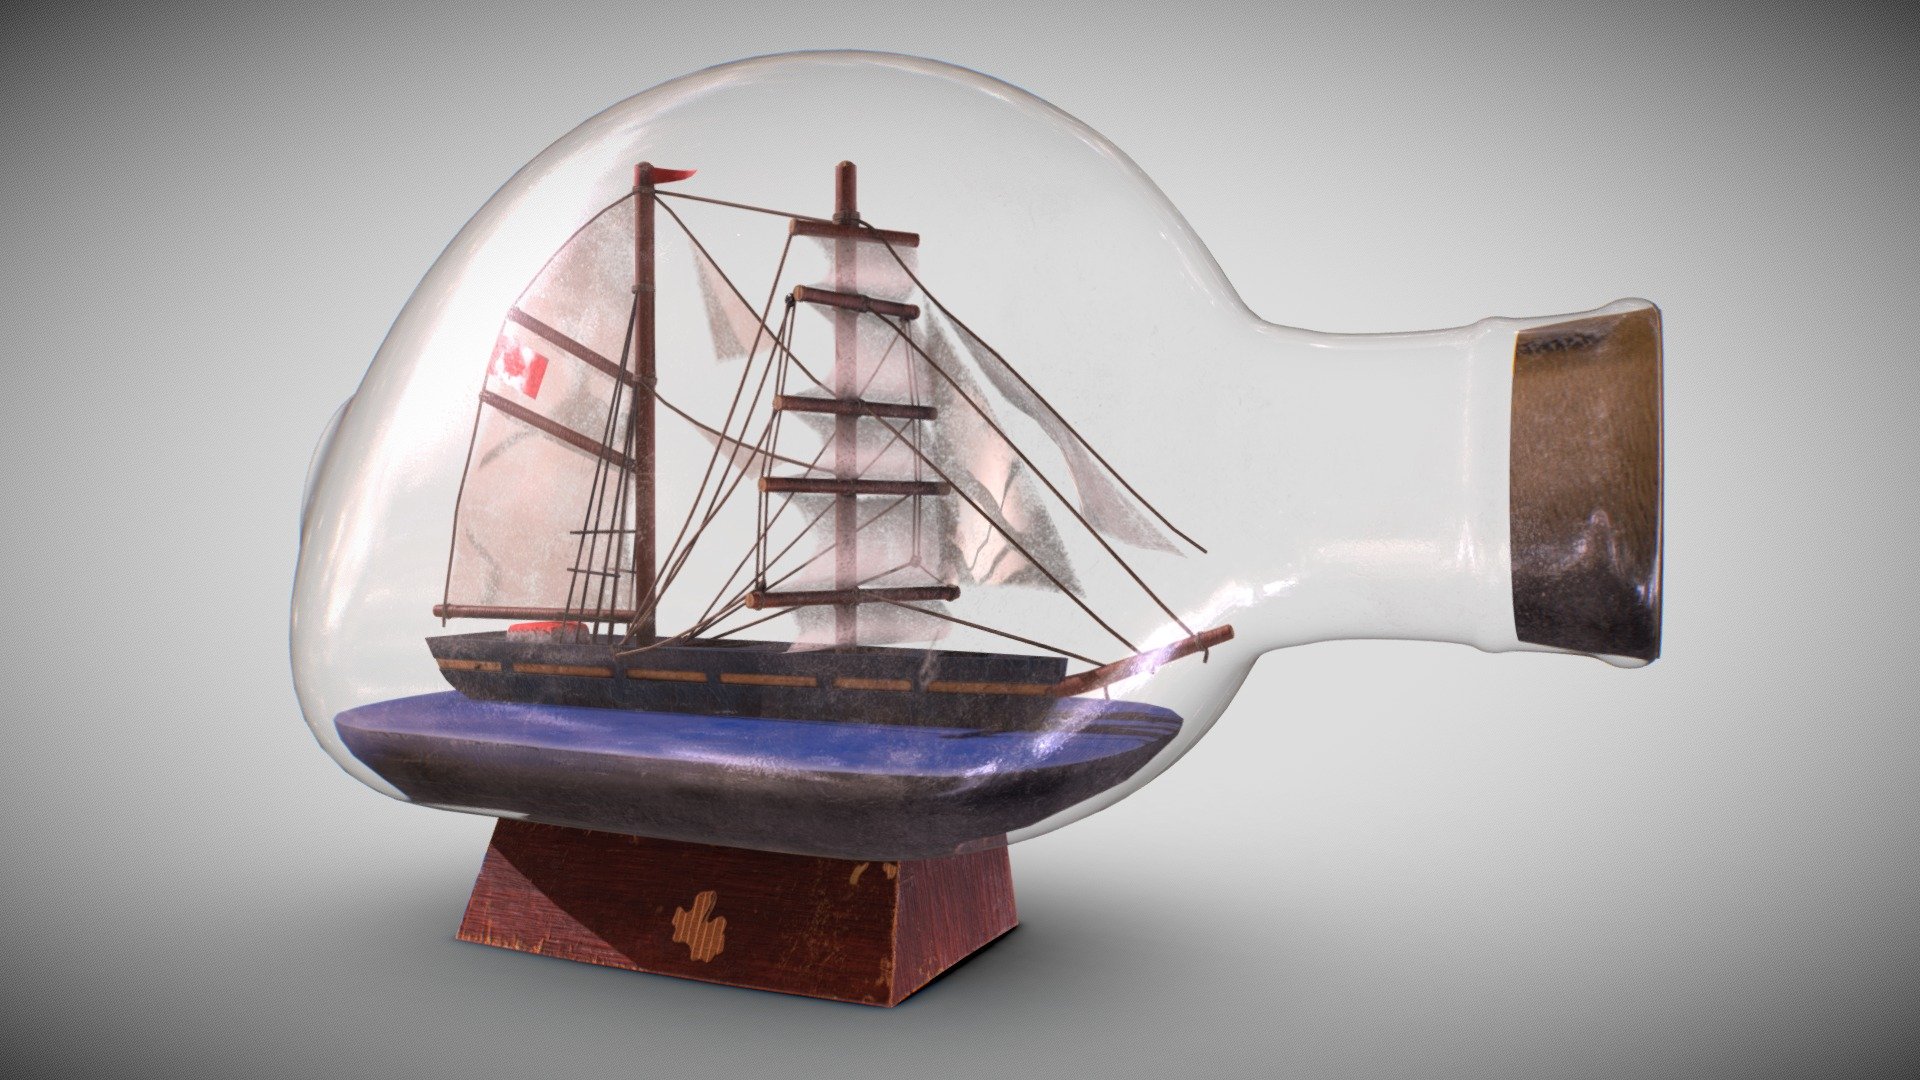 This model features a fully PBR textured boat model and bottle model. The boat and bottle are separate materials, so each have their own unique UV sets to ensure maximum quality.




Each and every part of the model is UV unwrapped by hand to ensure to ensure minimal stretching in textures.

UV Space of the boat: 77.58% efficiency.

UV Space of the bottle: 79.35% efficiency.

This model  uses a free smart material that was used to create the cloth on the sails that is available on my ArtStation store for download.

What's included?




3D Ship Model

3D Bottle Model

PBR Ship Textures

PBR Bottle Textures

Hand created UVs

Efficiently packed UVs

3D Models created in: Blender

Textures created in: Substance Designer, Substance Painter

File format of pre-exported textures: JPG

Resolution of normal maps: 2048x2048

Resolution of all other textures: 4096x4096 (4K)

Version 1, 2021/01/30 - 3D Models, PBR Textures 3d model